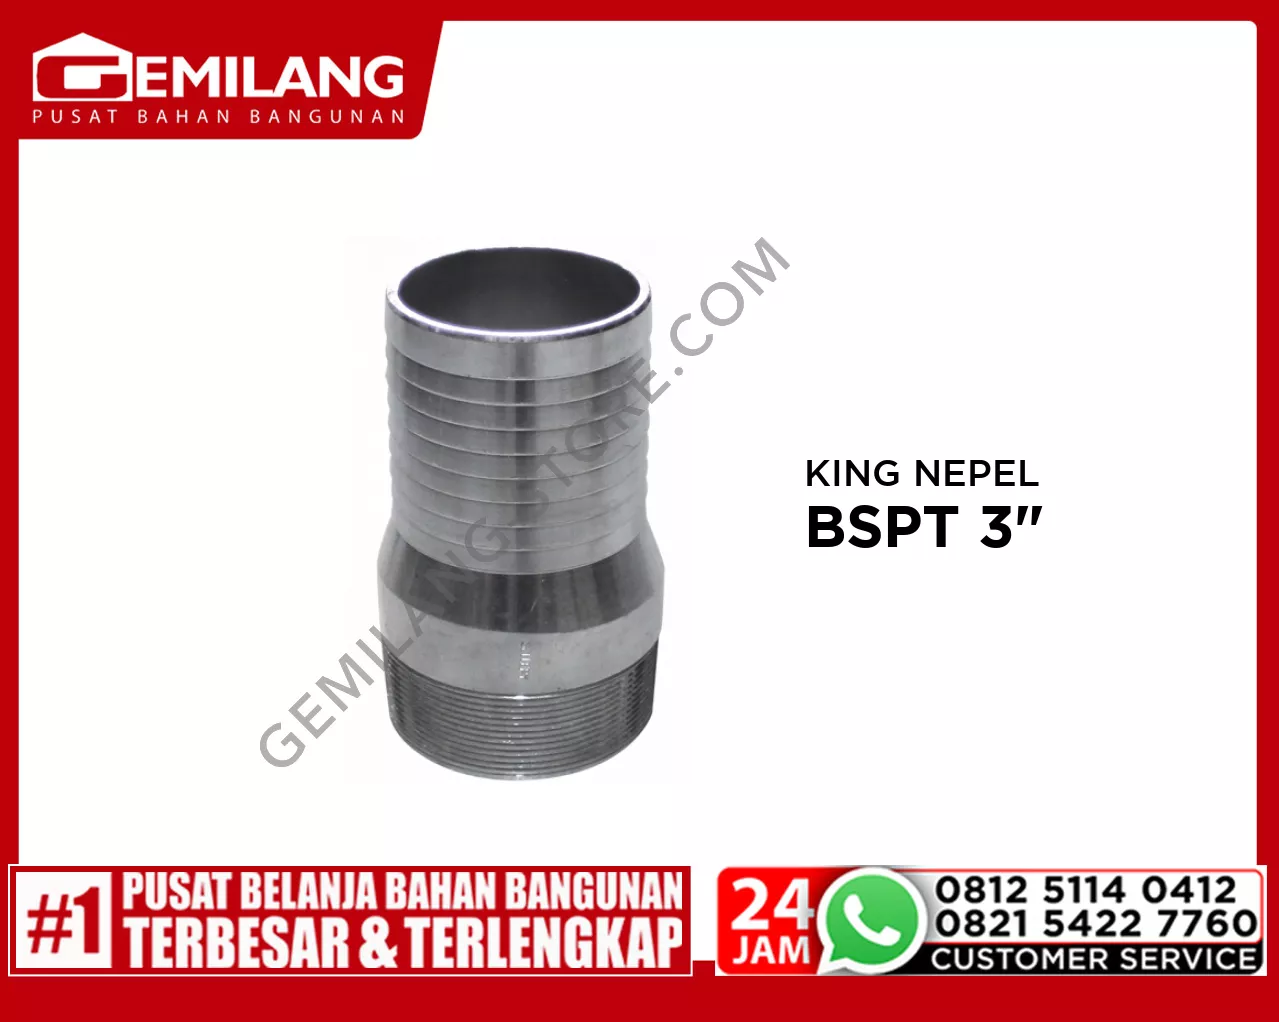 SELLERY KING NEPEL BSPT 3inch